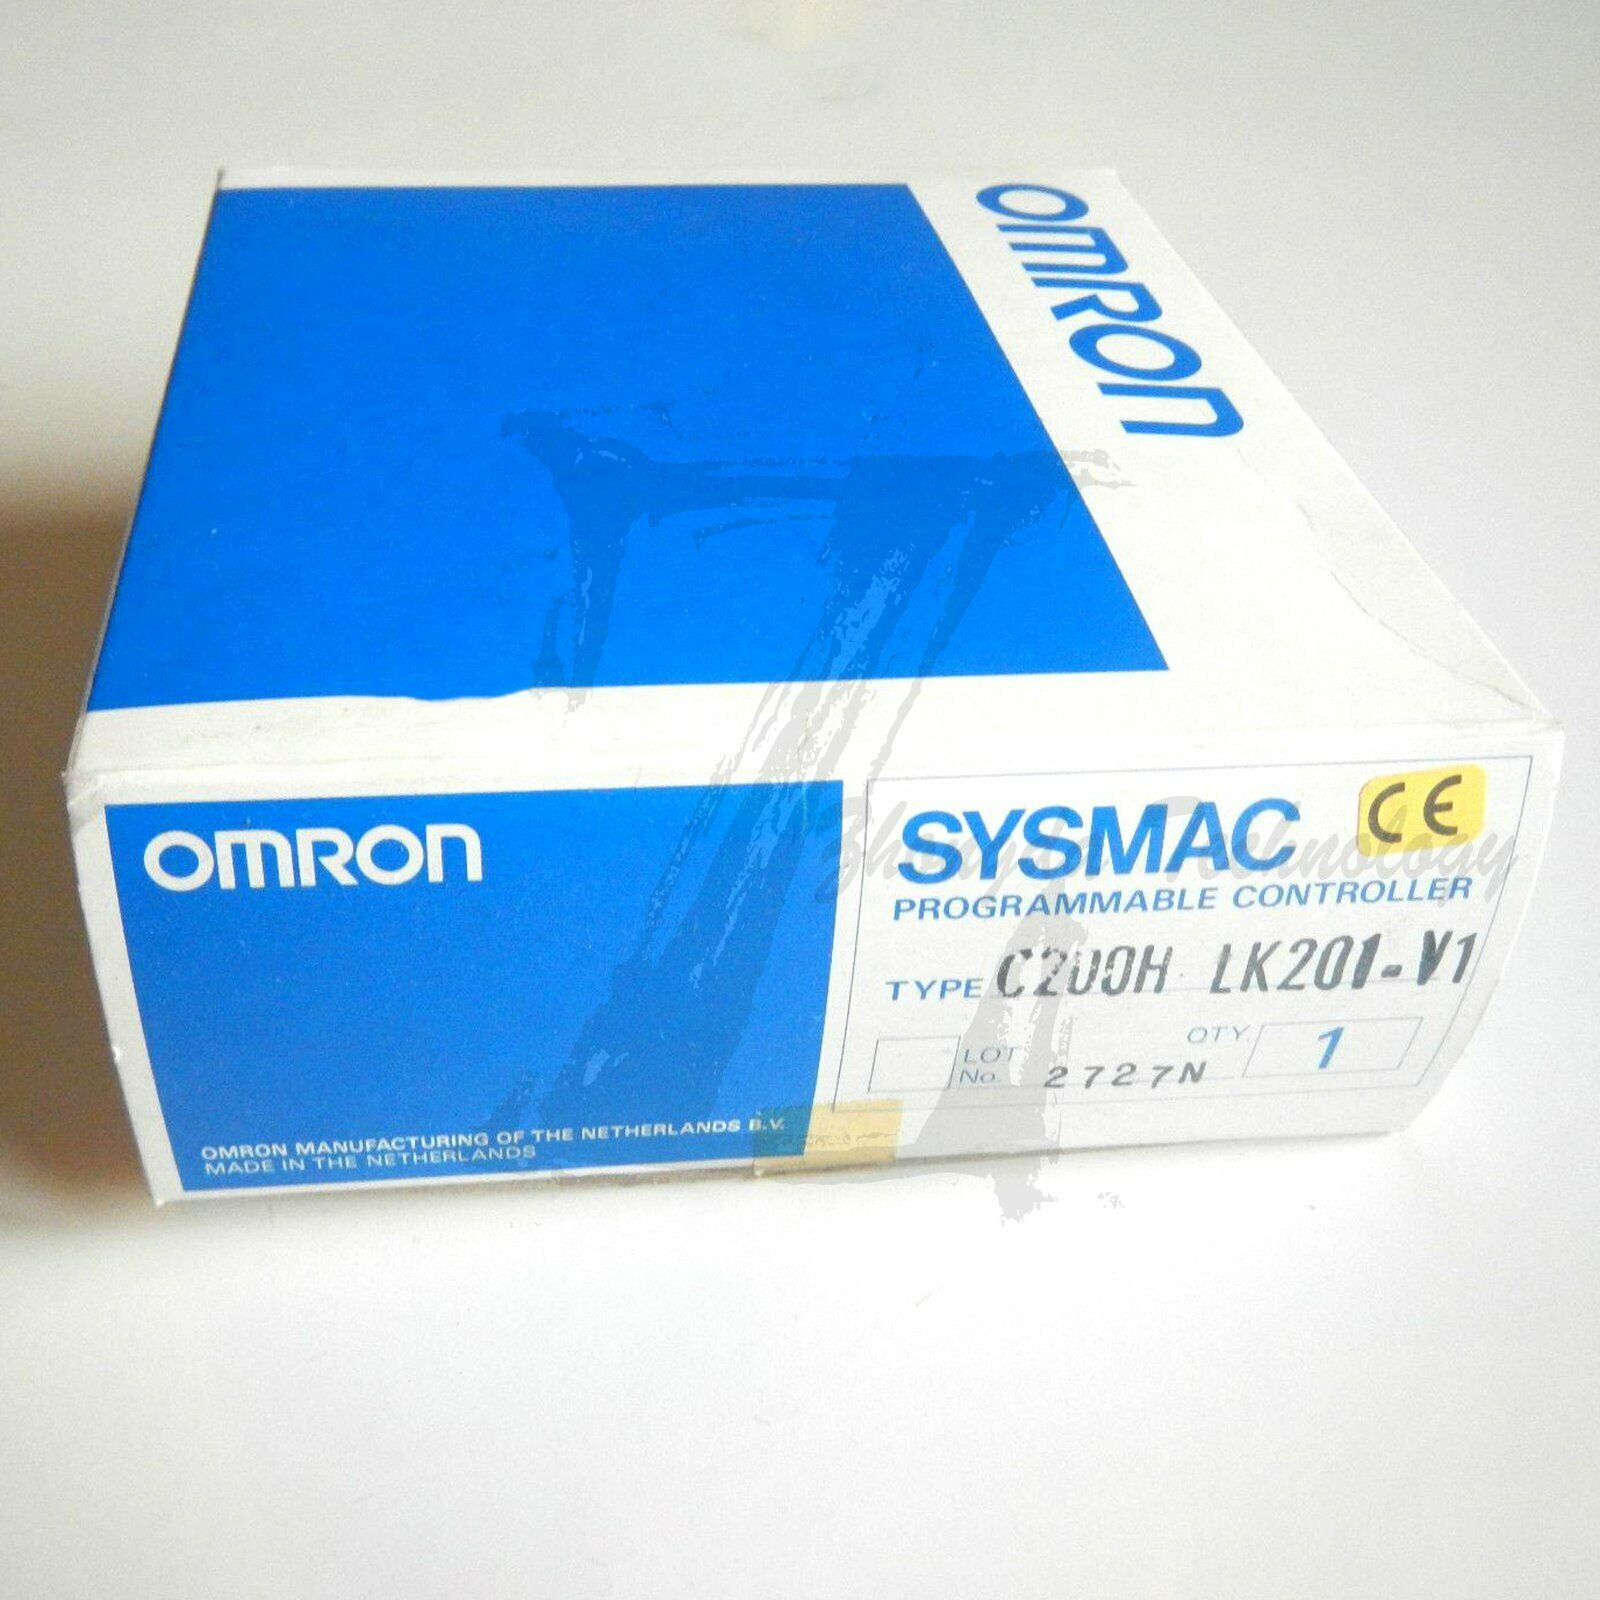 1pc new Omron C200H-LK201-V1 module one year warranty KOEED 1, 80%, import_2020_10_10_031751, Omron, Other